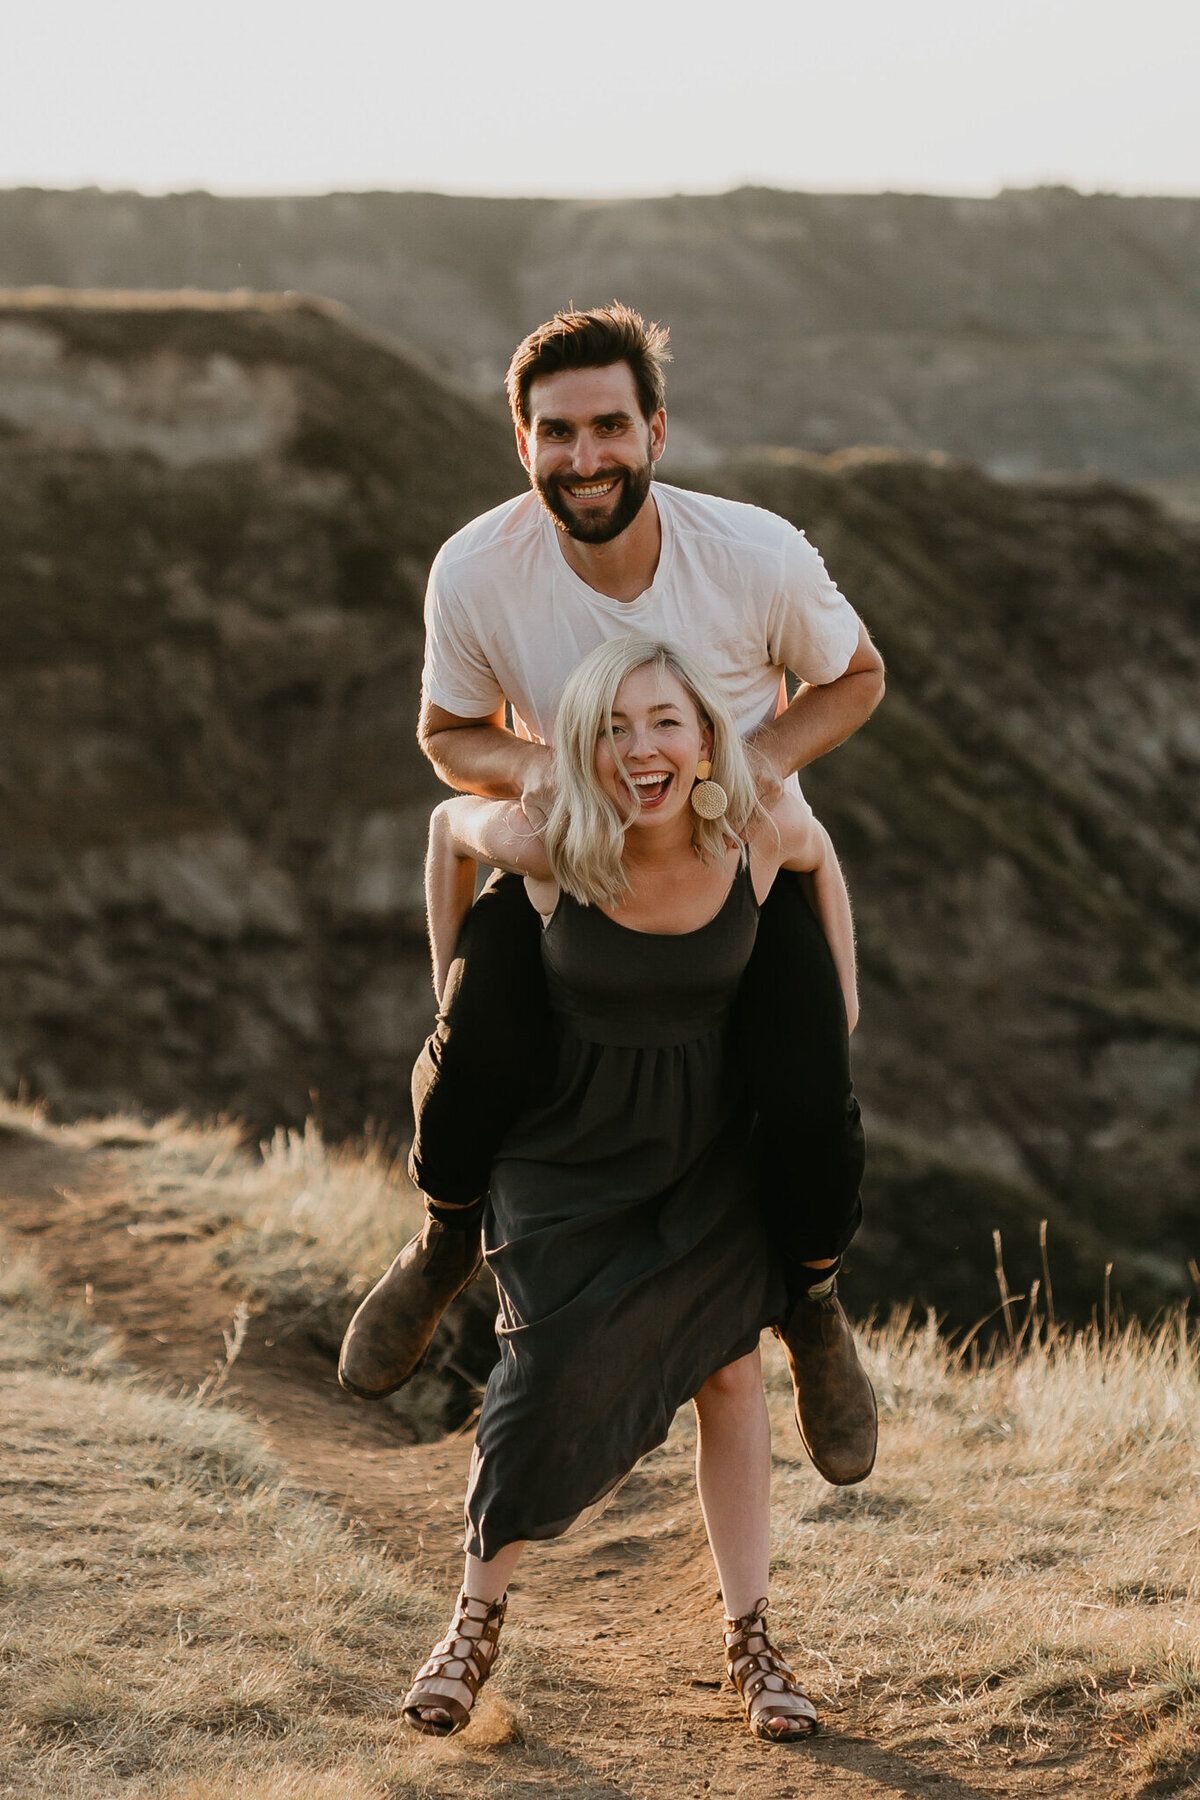 Woman giving man a piggy back captured by Nikki Collette Photography, adventurous and romantic wedding photographer in Red Deer, Alberta. Featured on the Bronte Bride Vendor Guide.